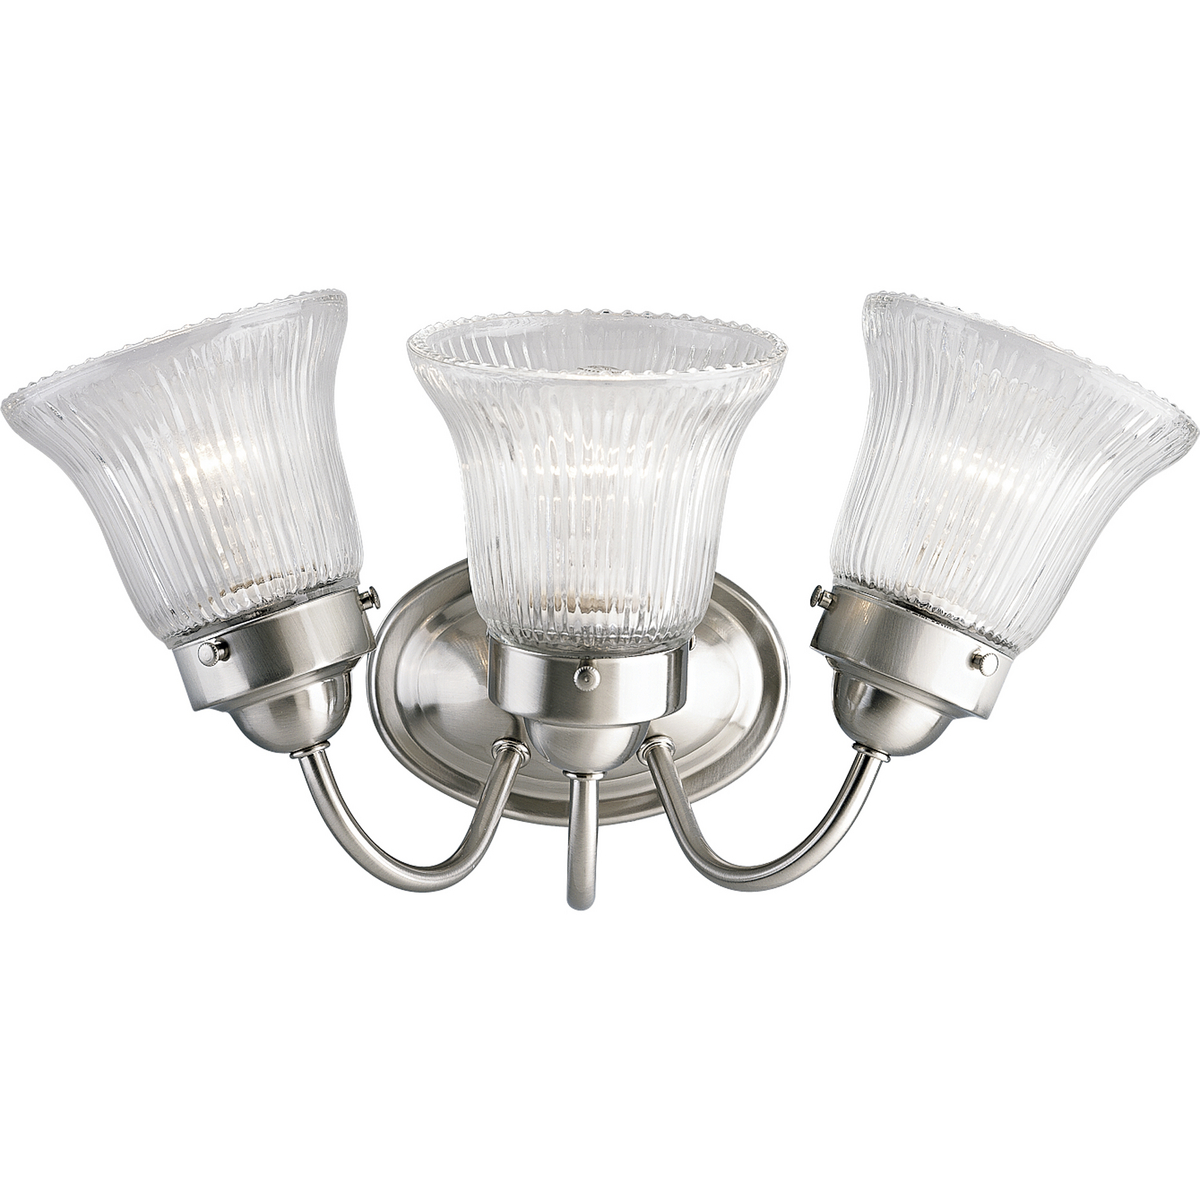 Fluted Glass 3-light bath fixture in a Brushed Nickel finish. Classic metallic fixture is paired with sparkling clear prismatic glass. Timeless in its vintage appeal, this light is stylish for both new and restored homes.